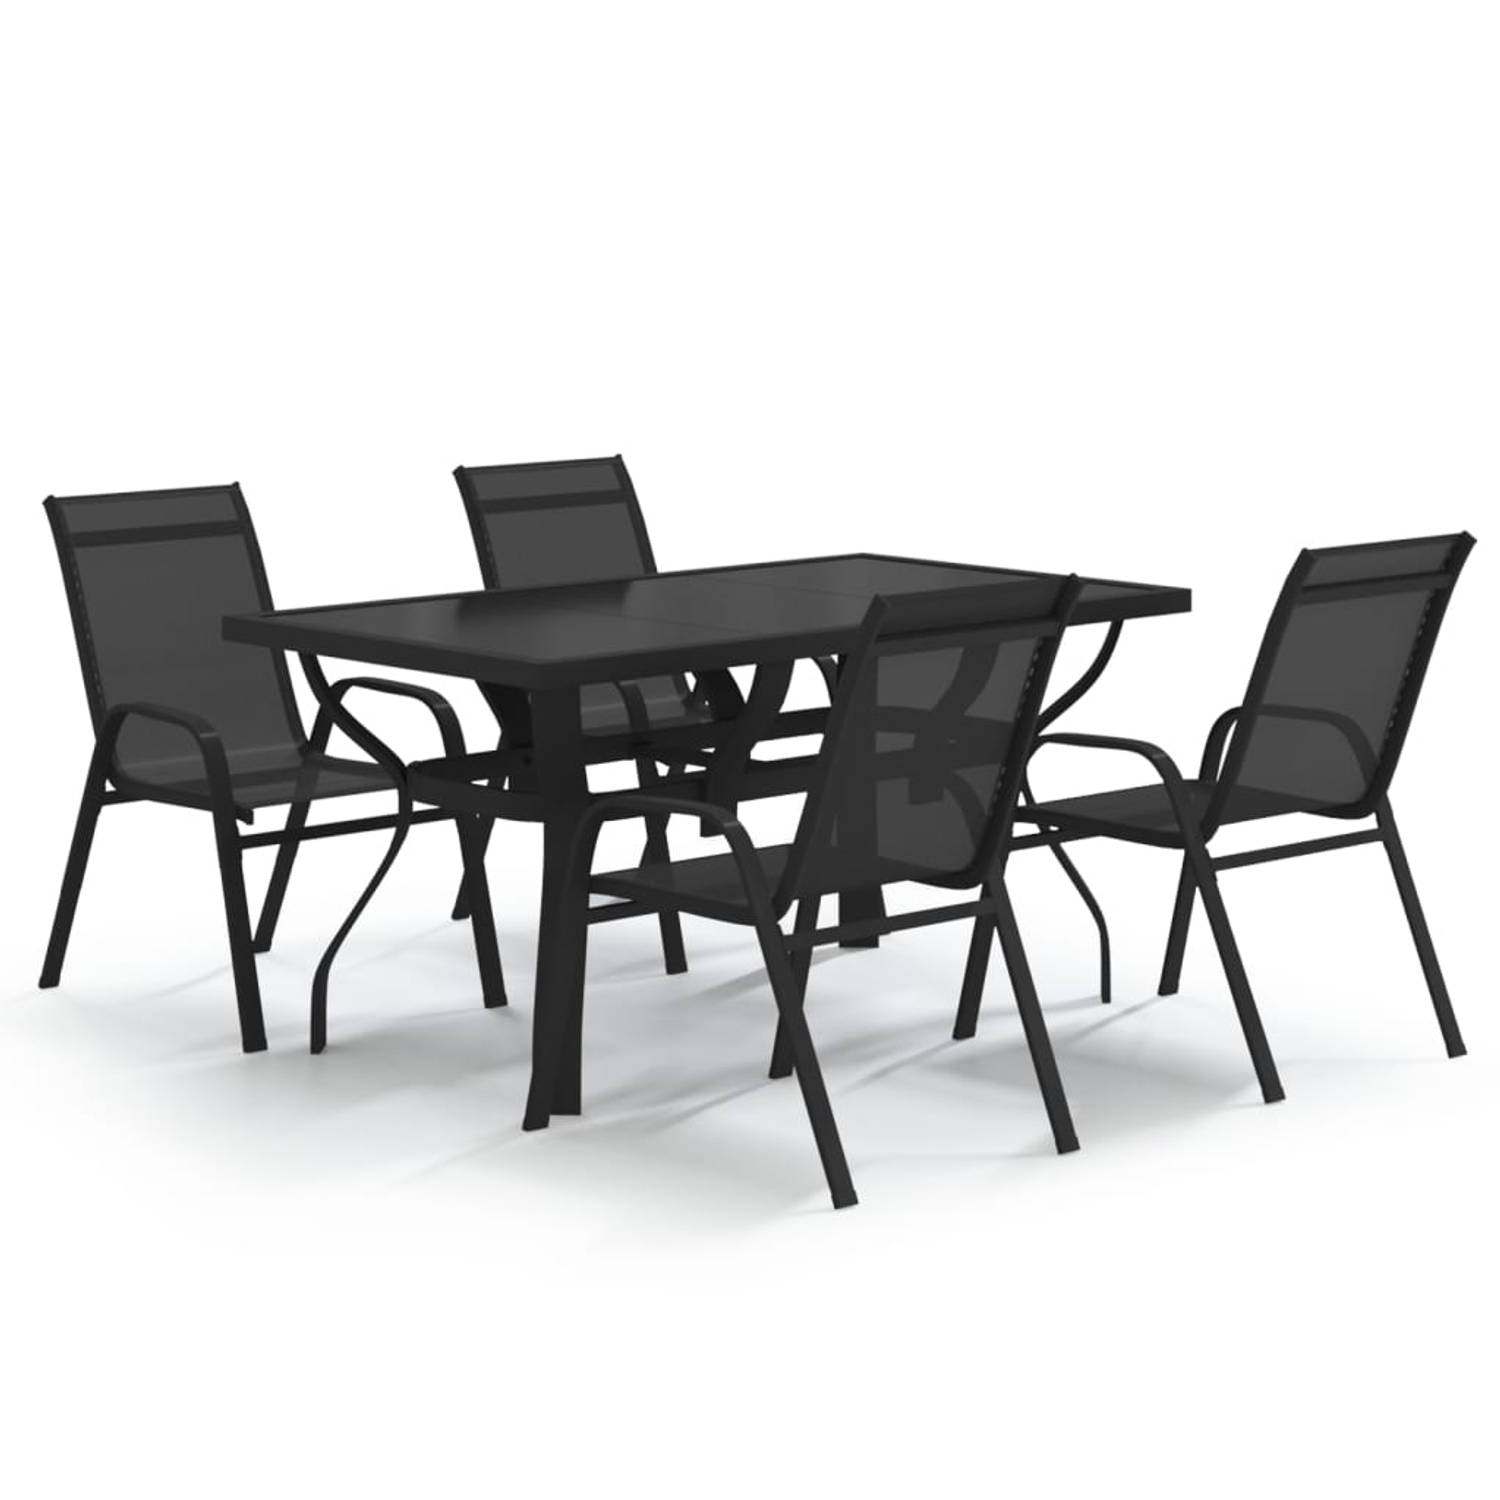 The Living Store Garden Set - Elegant design. durable frame. space-saving chairs - 140x70x70 cm table. 55x65x89 cm chairs